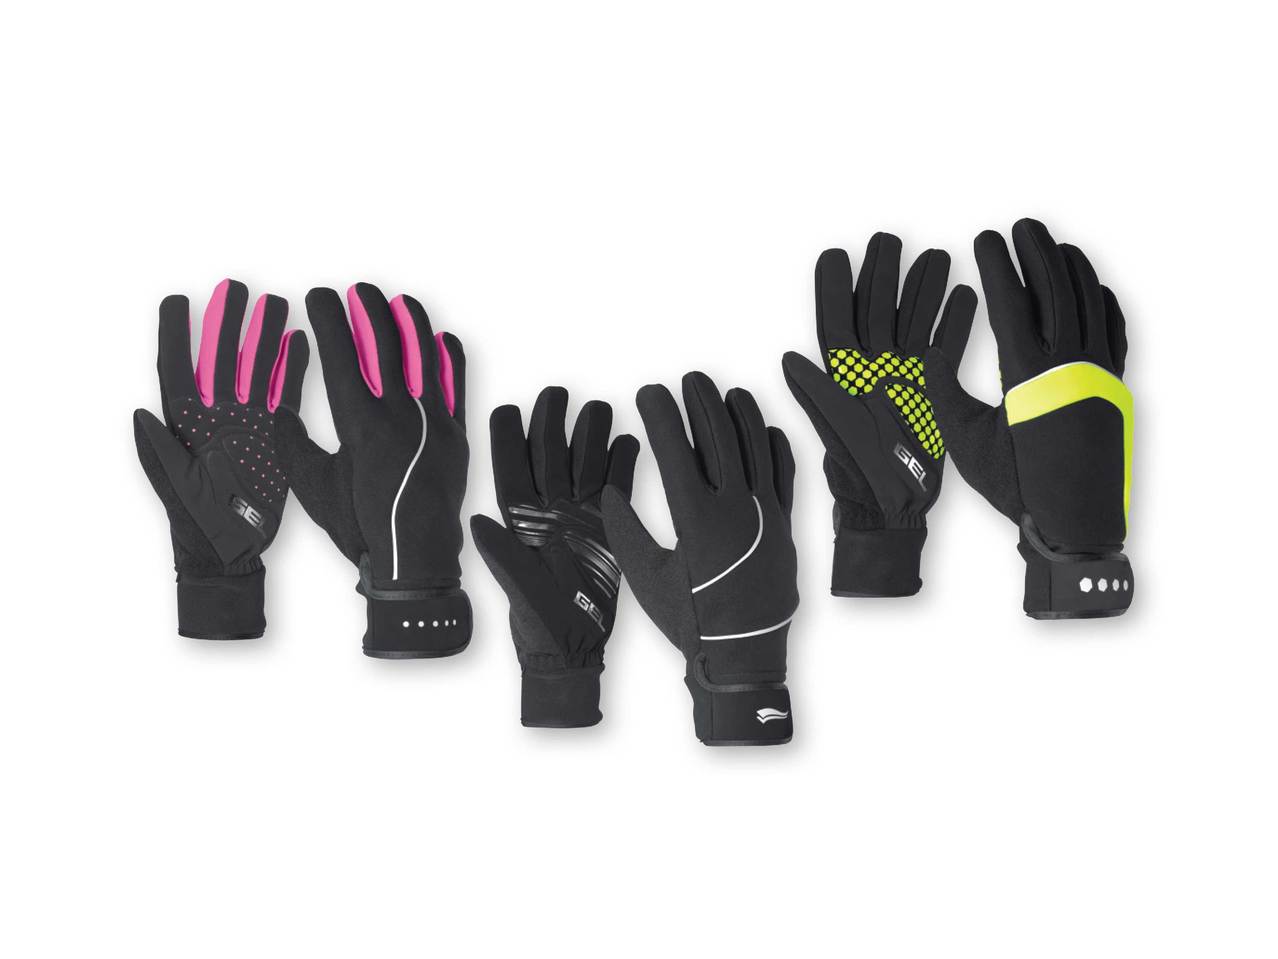 CRIVIT Unisex Thermal Cycling Gloves